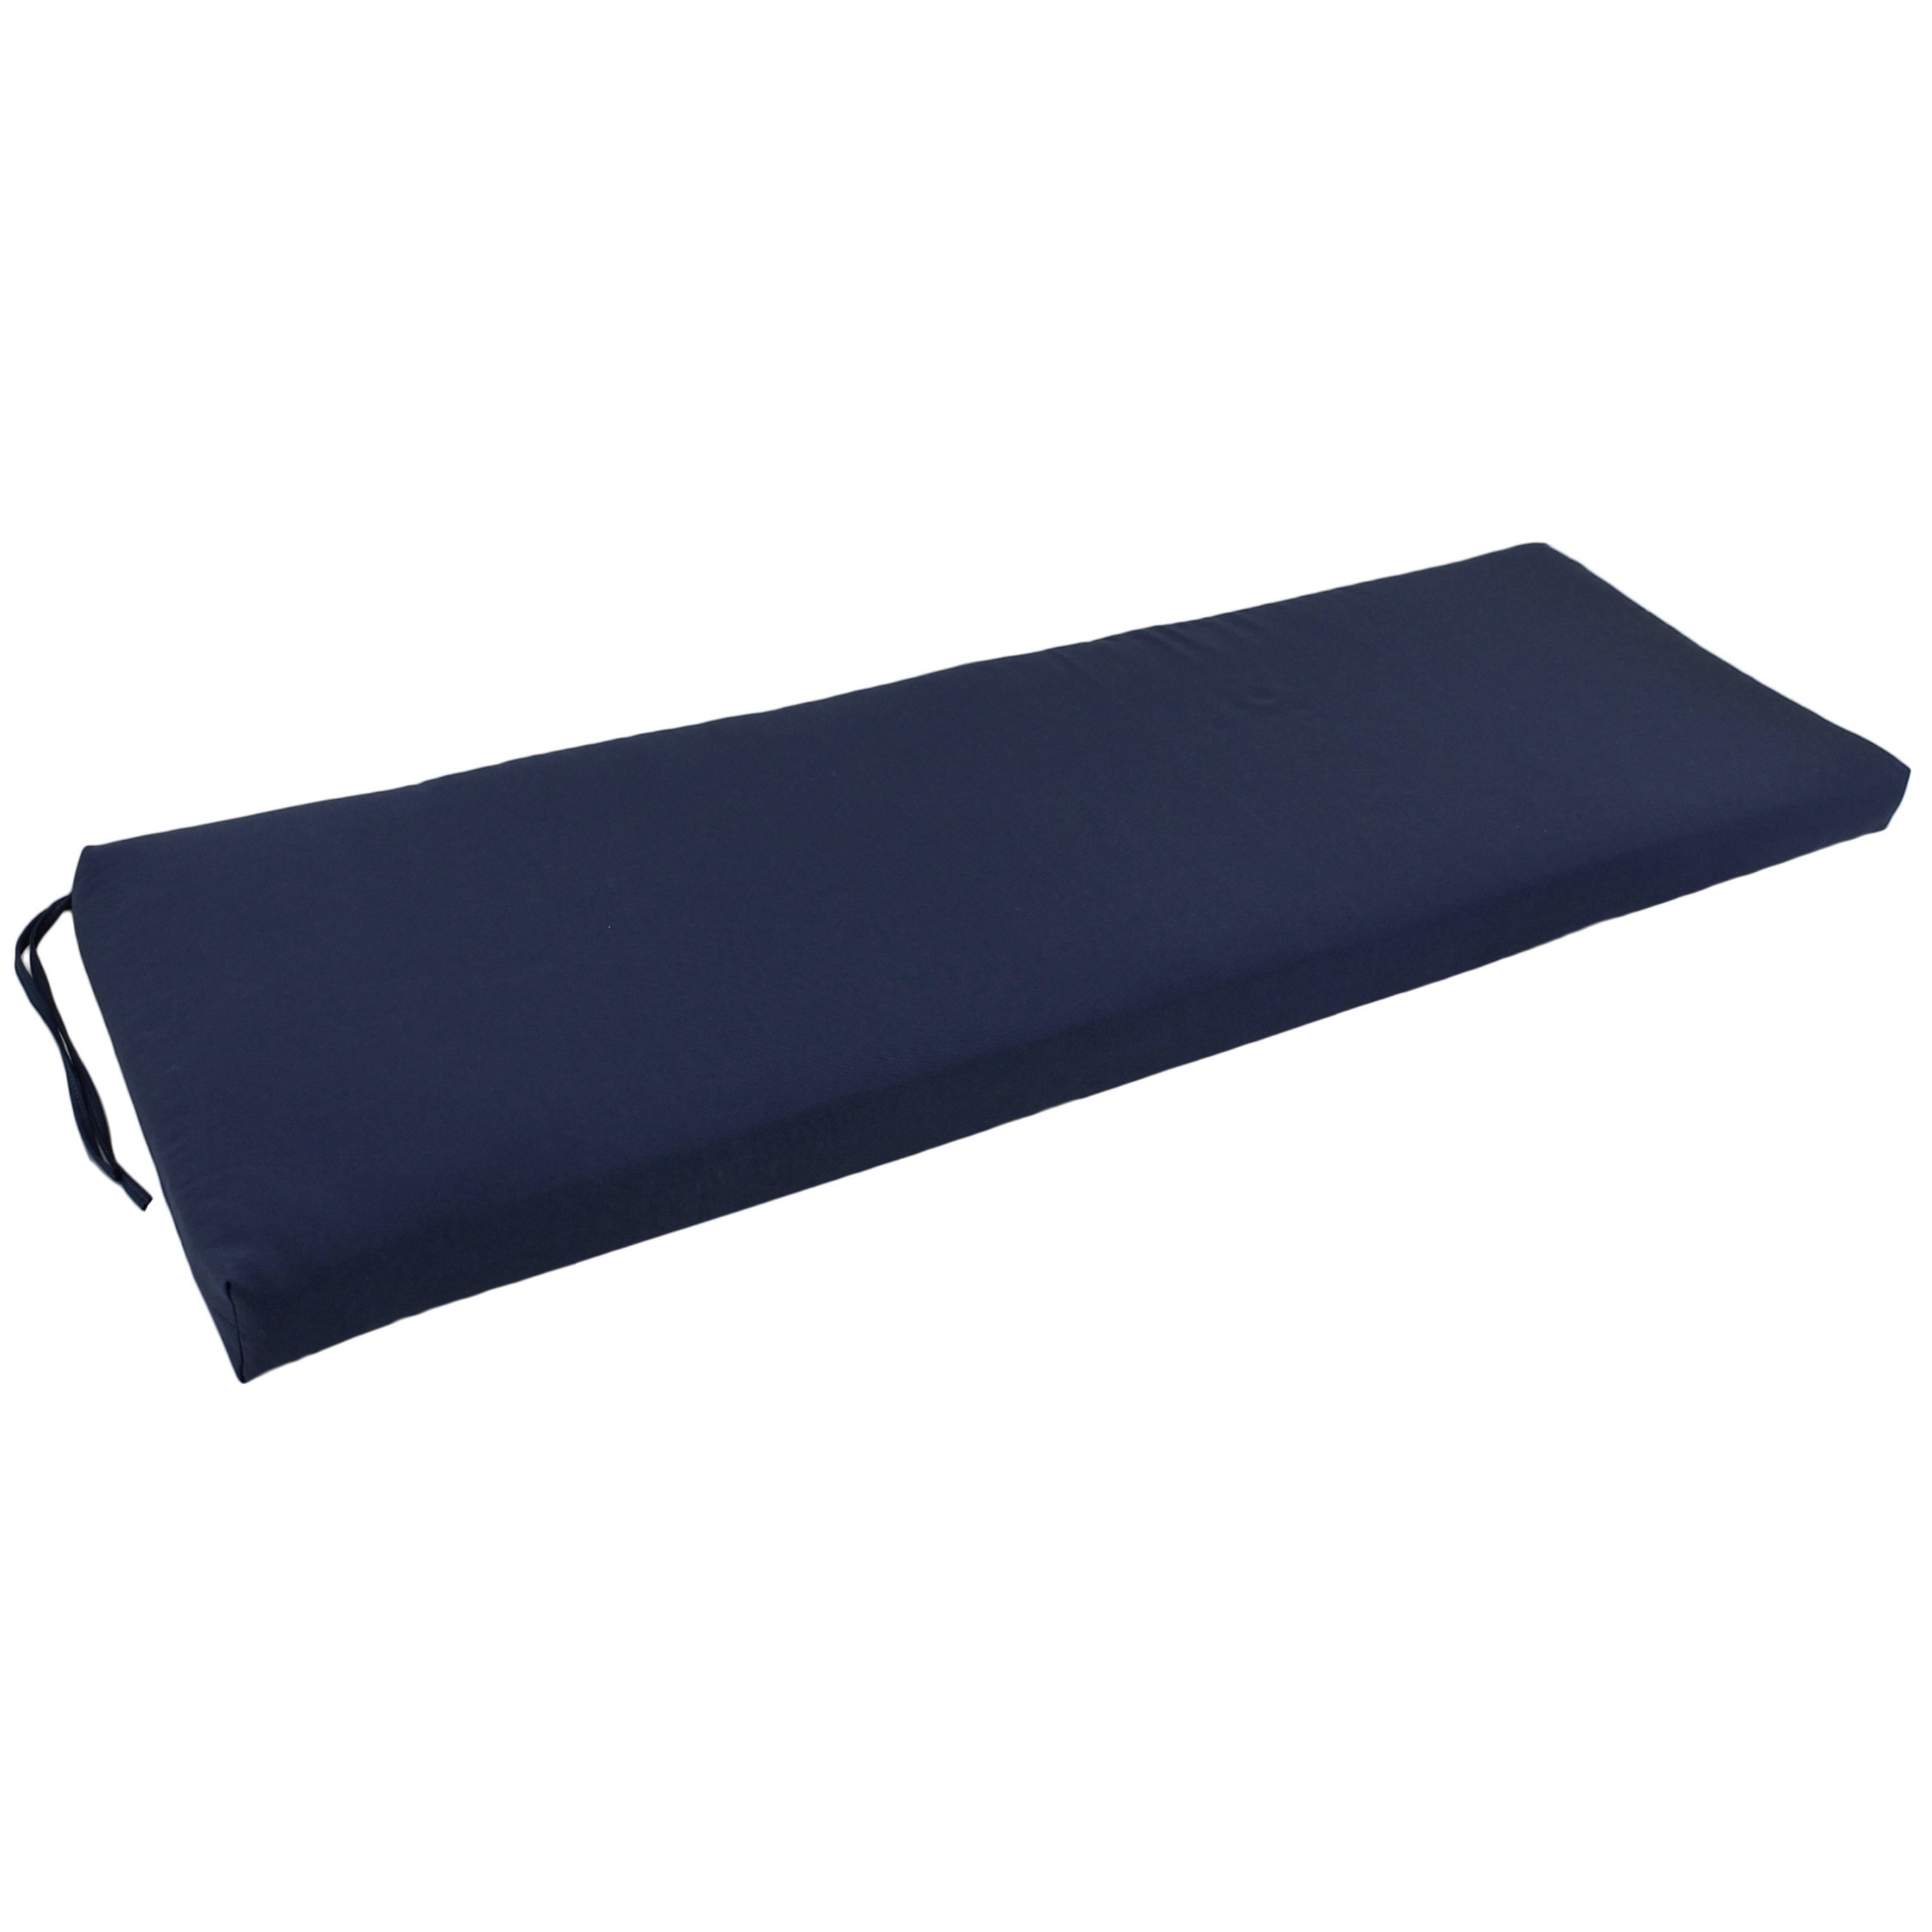 https://ak1.ostkcdn.com/images/products/is/images/direct/7f64f93b4debd340131b1dc136e9f0335fec24d6/Twill-Indoor-Bench-Cushion-%2848-%2C-51-%2C-or-54-inches-wide%29.jpg